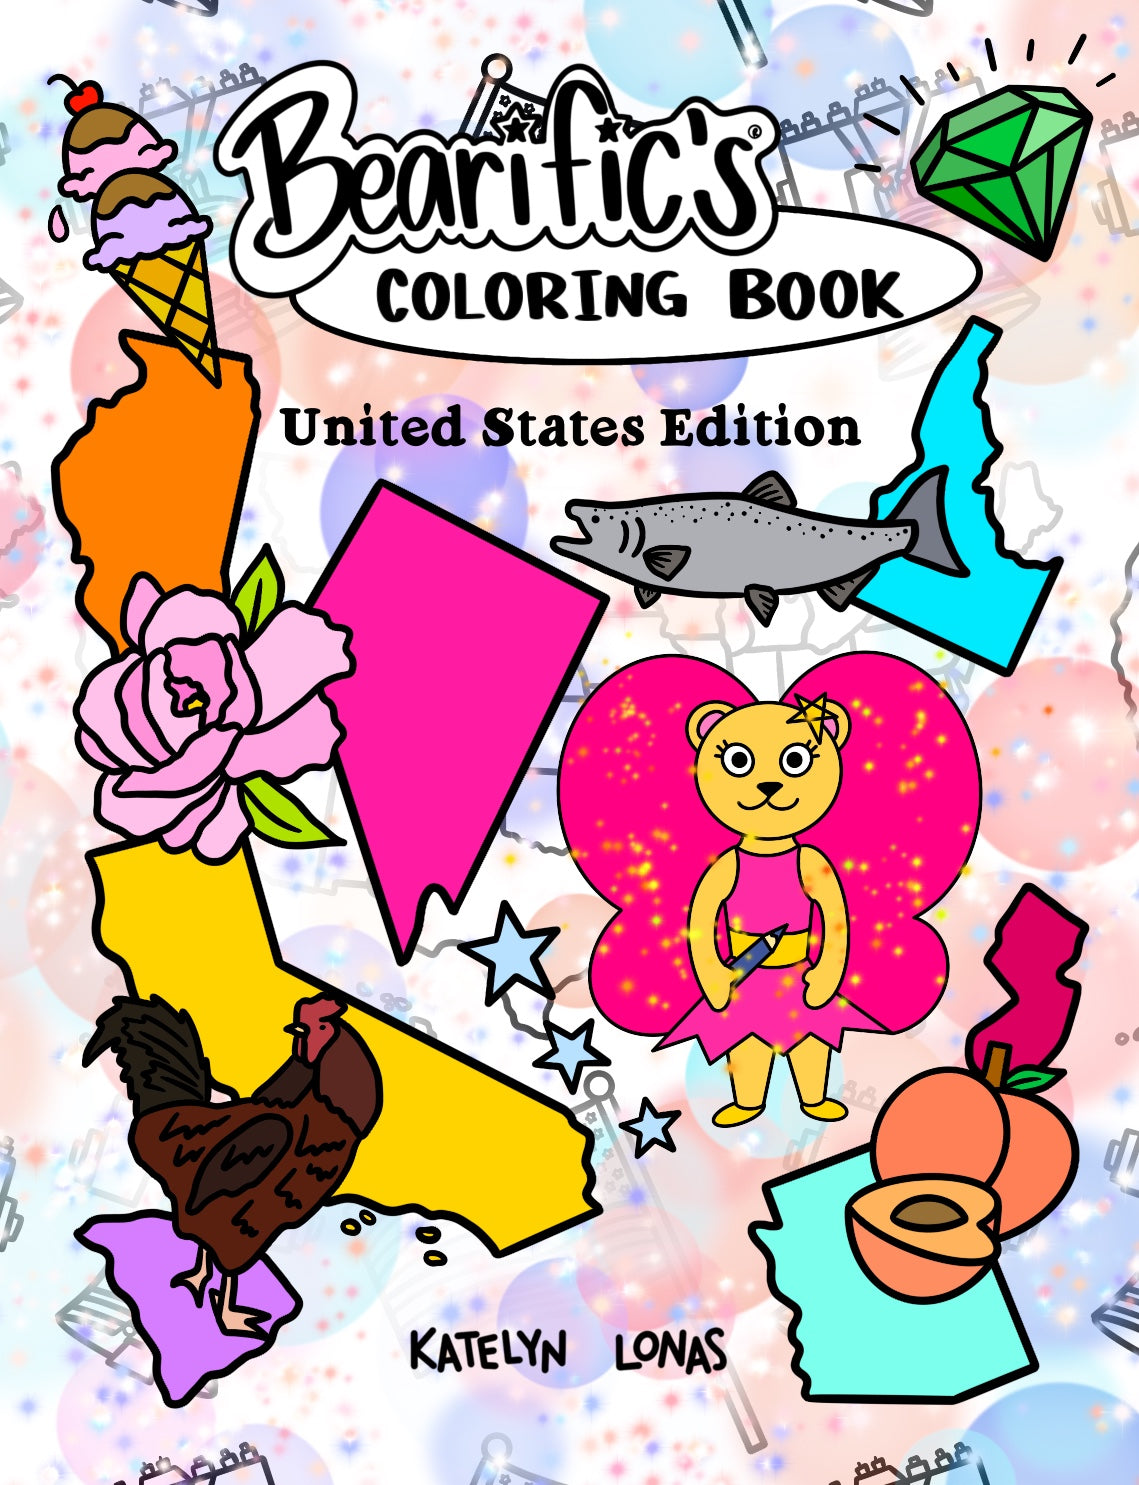 Bearific's® Coloring Book: United States Edition